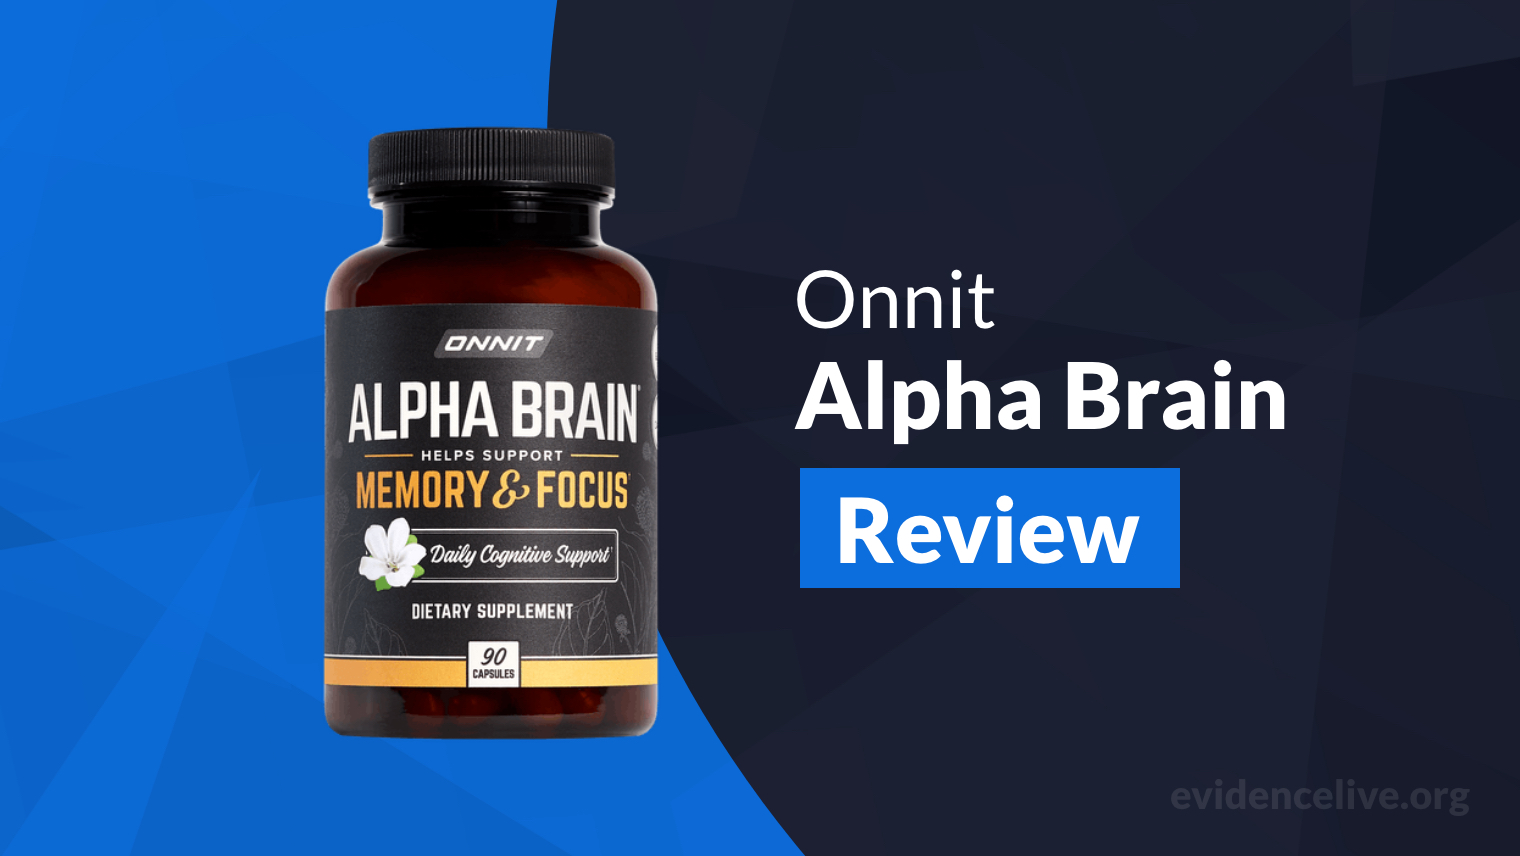 Onnit Alpha Brain Review: Is It Worth The Money?